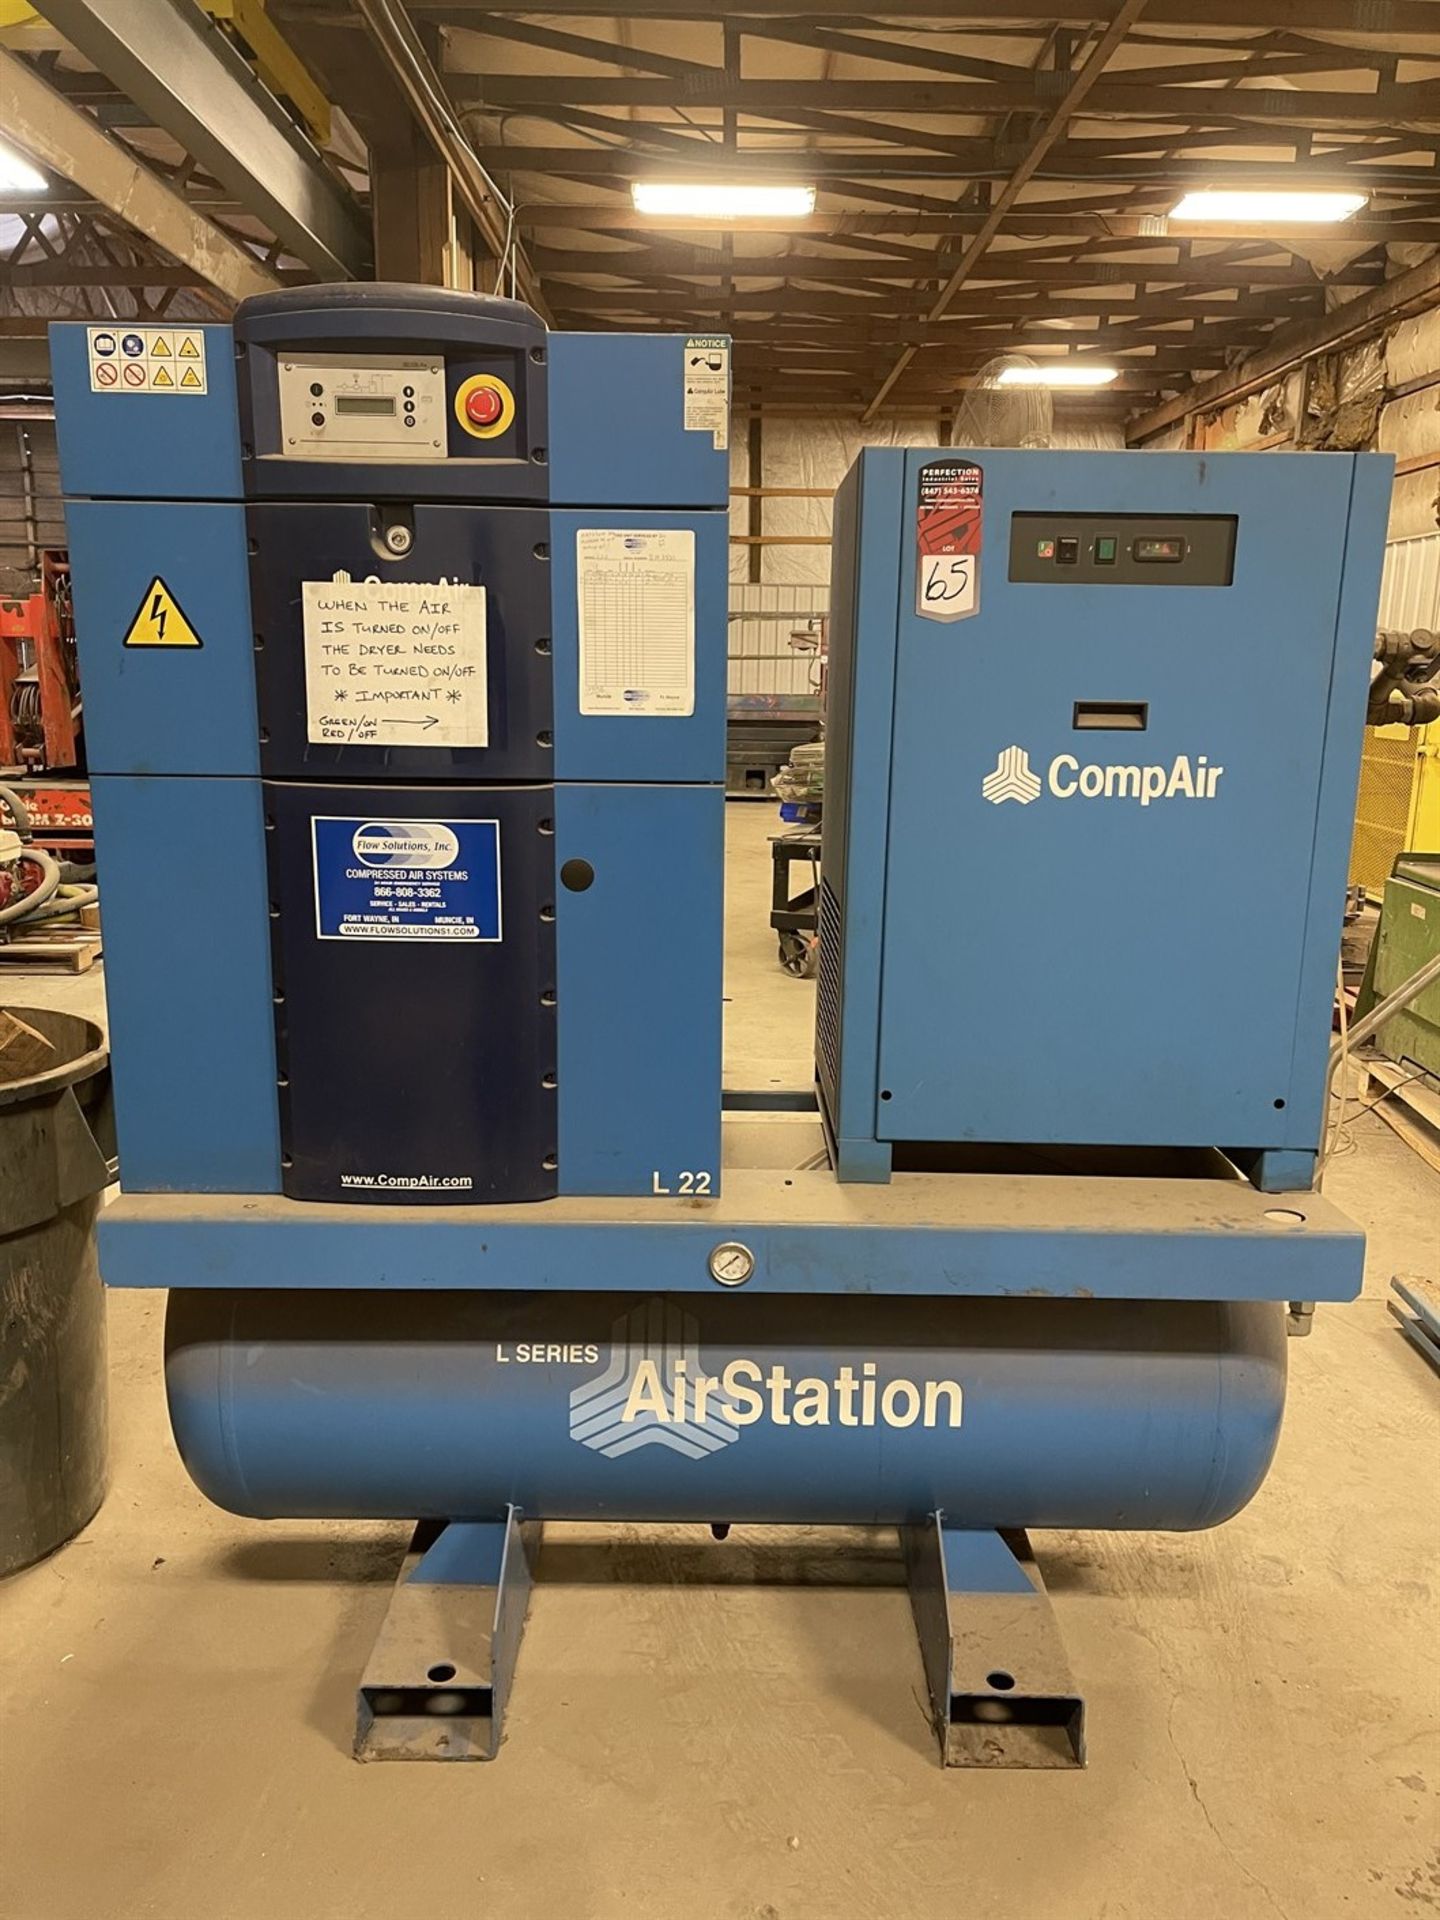 2012 CompAir L22 L-Series Air Station Compressor System, s/n D102821, 30 HP, 125 PSI, w/ compare - Image 2 of 6